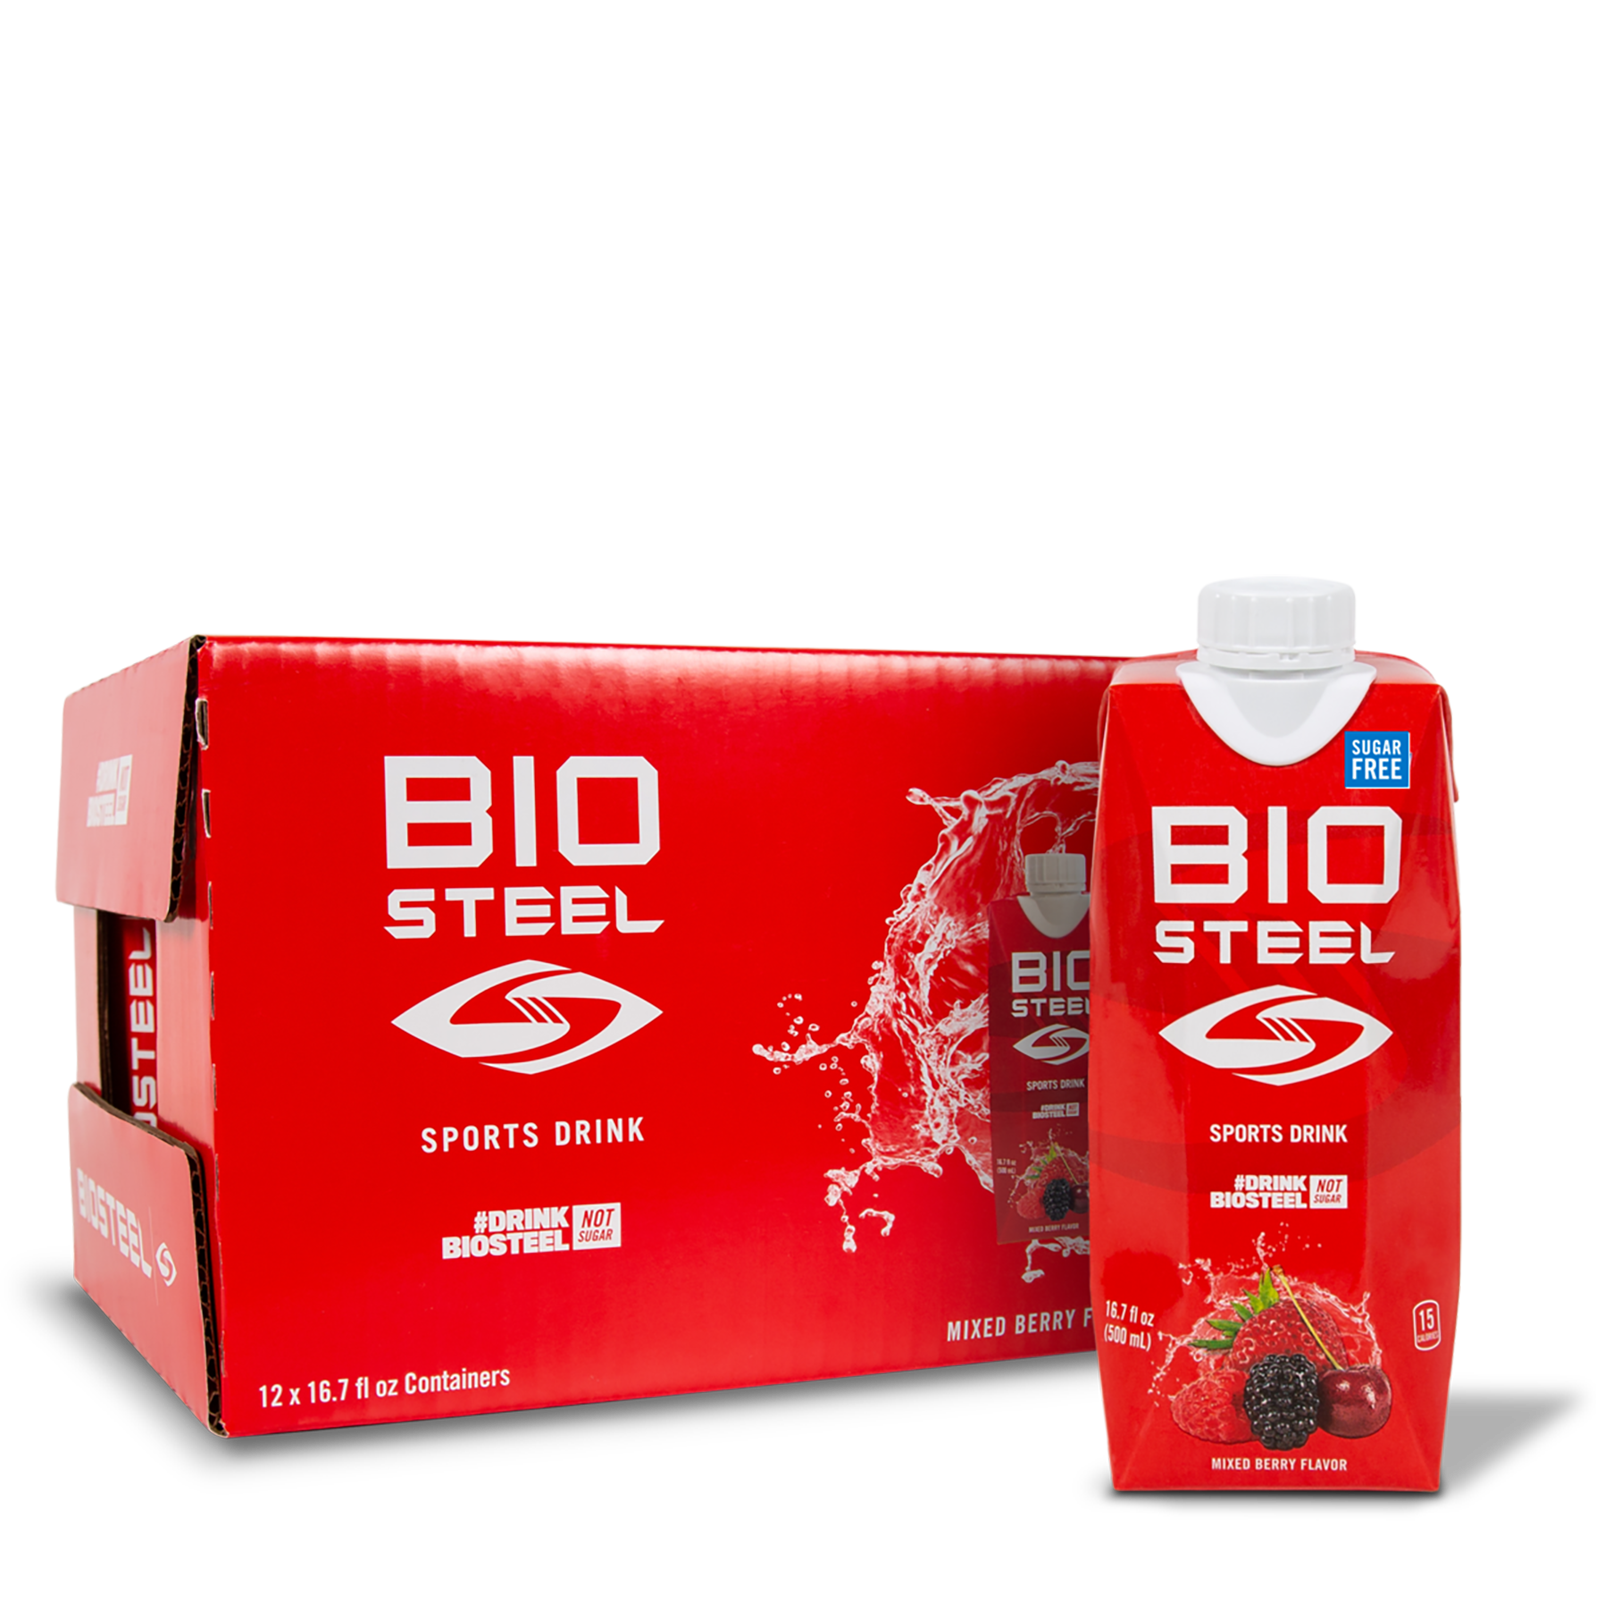 SPORTS DRINK / Mixed Berry 12 Pack BioSteel